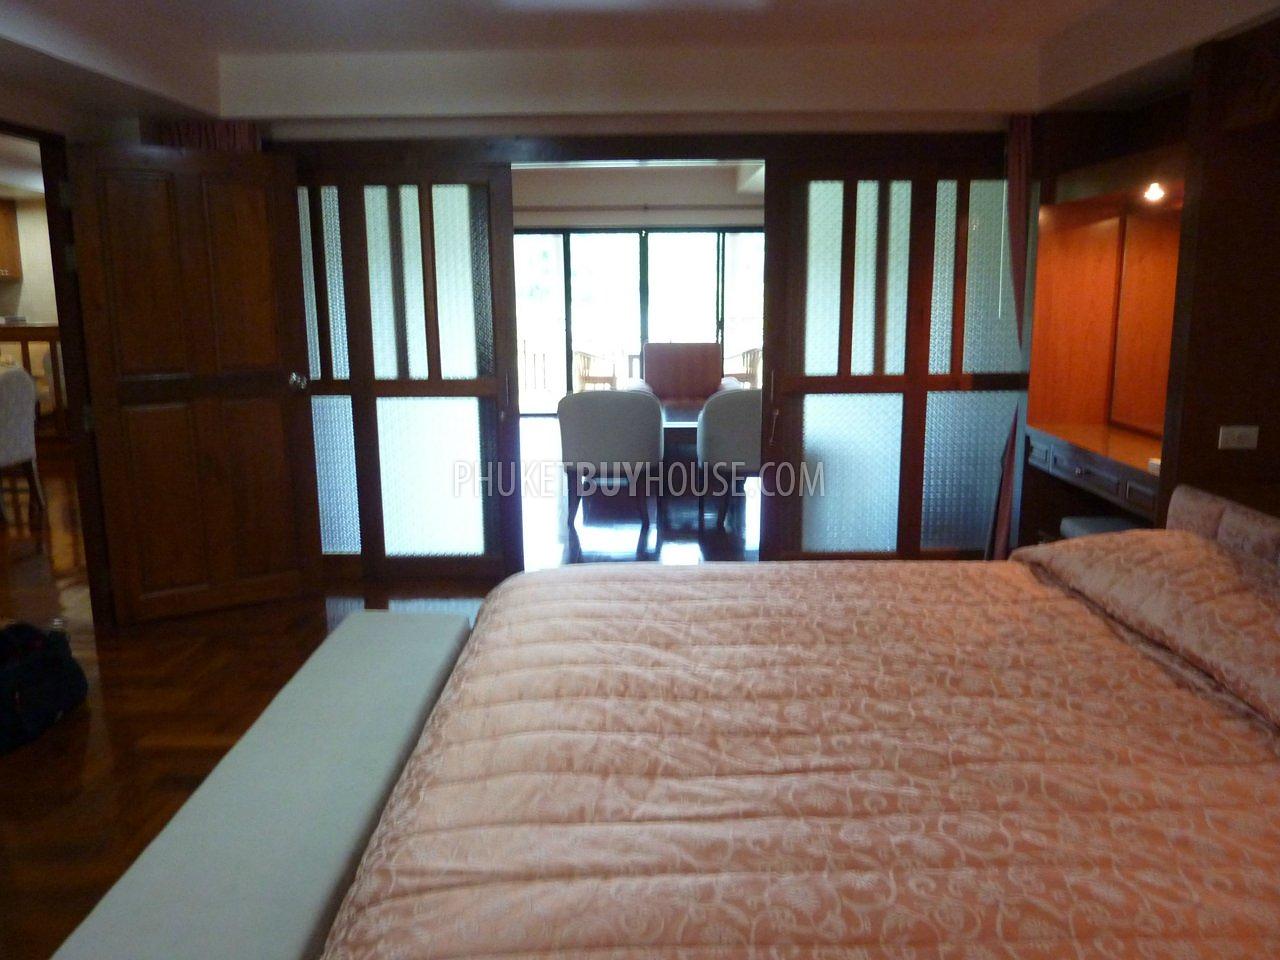 NAI2456: Freehold: Very nice 2 bedr. apartment (top floor), fully furnished, near beautiful Nai Harn Beach. Photo #24